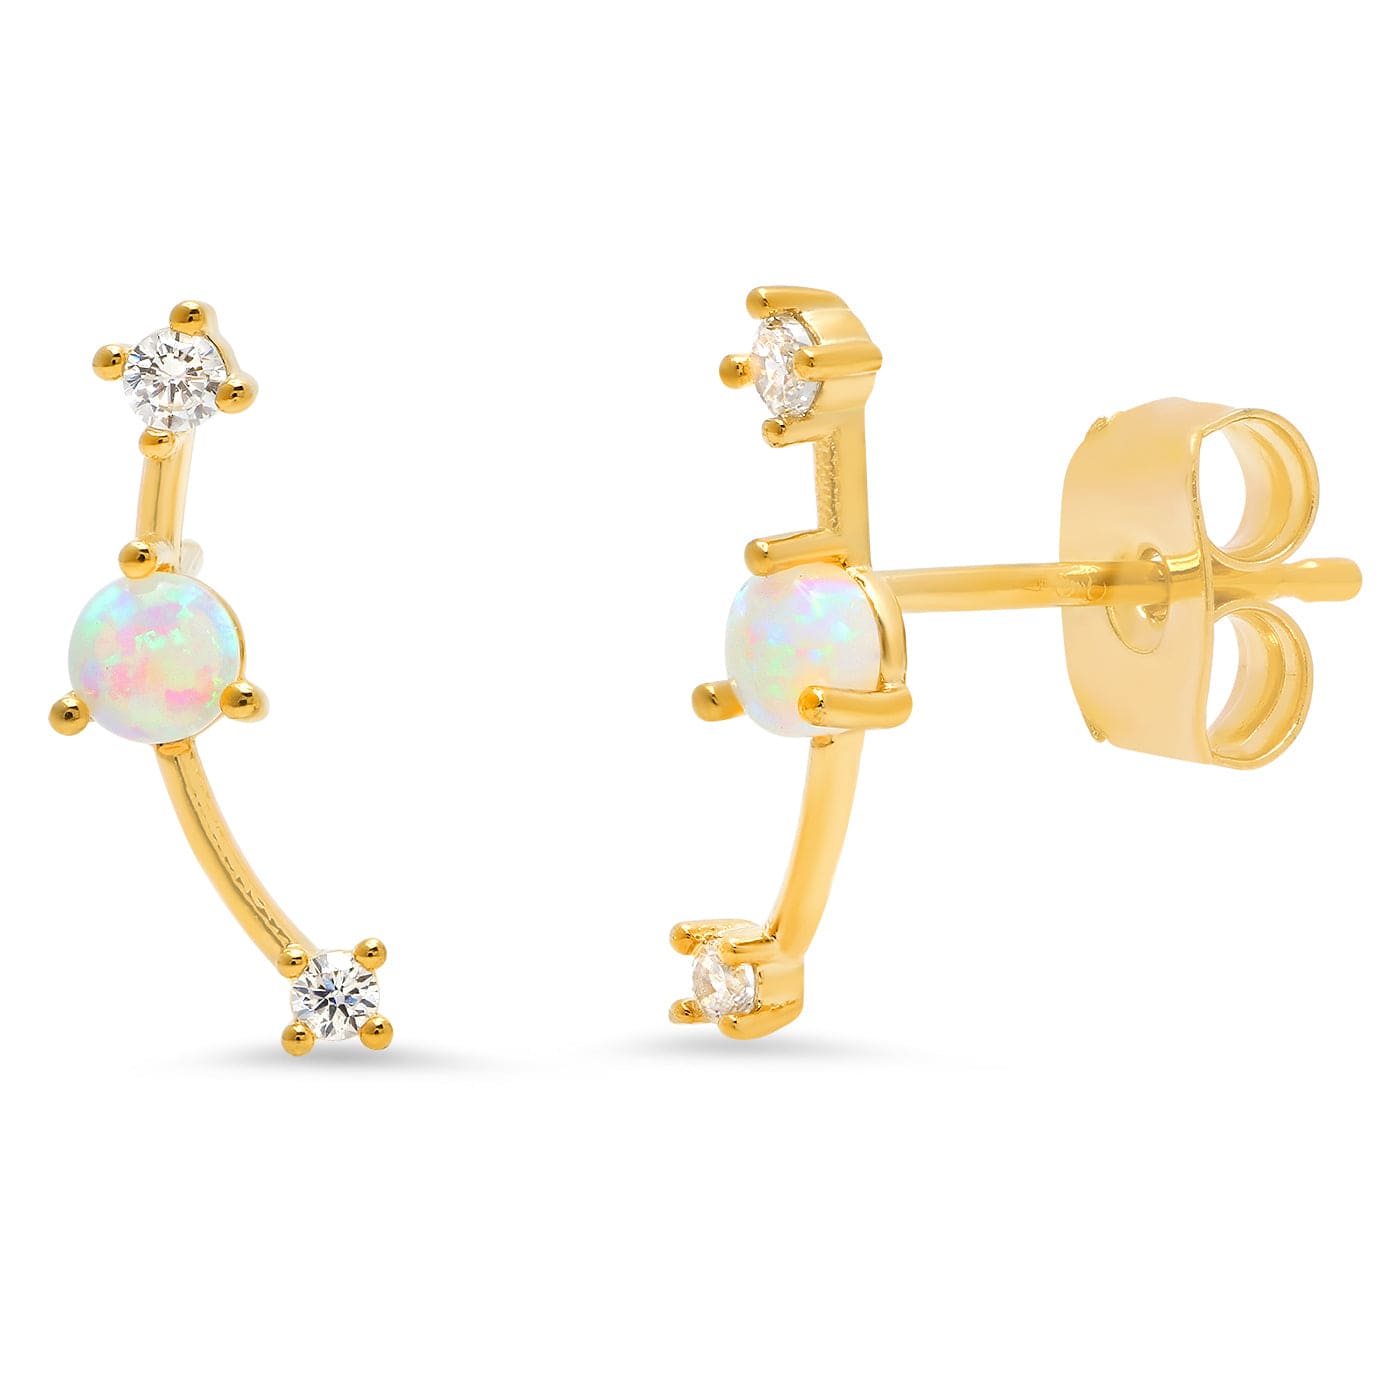 TAI JEWELRY Earrings Opal Ear Climber With Cz Accents